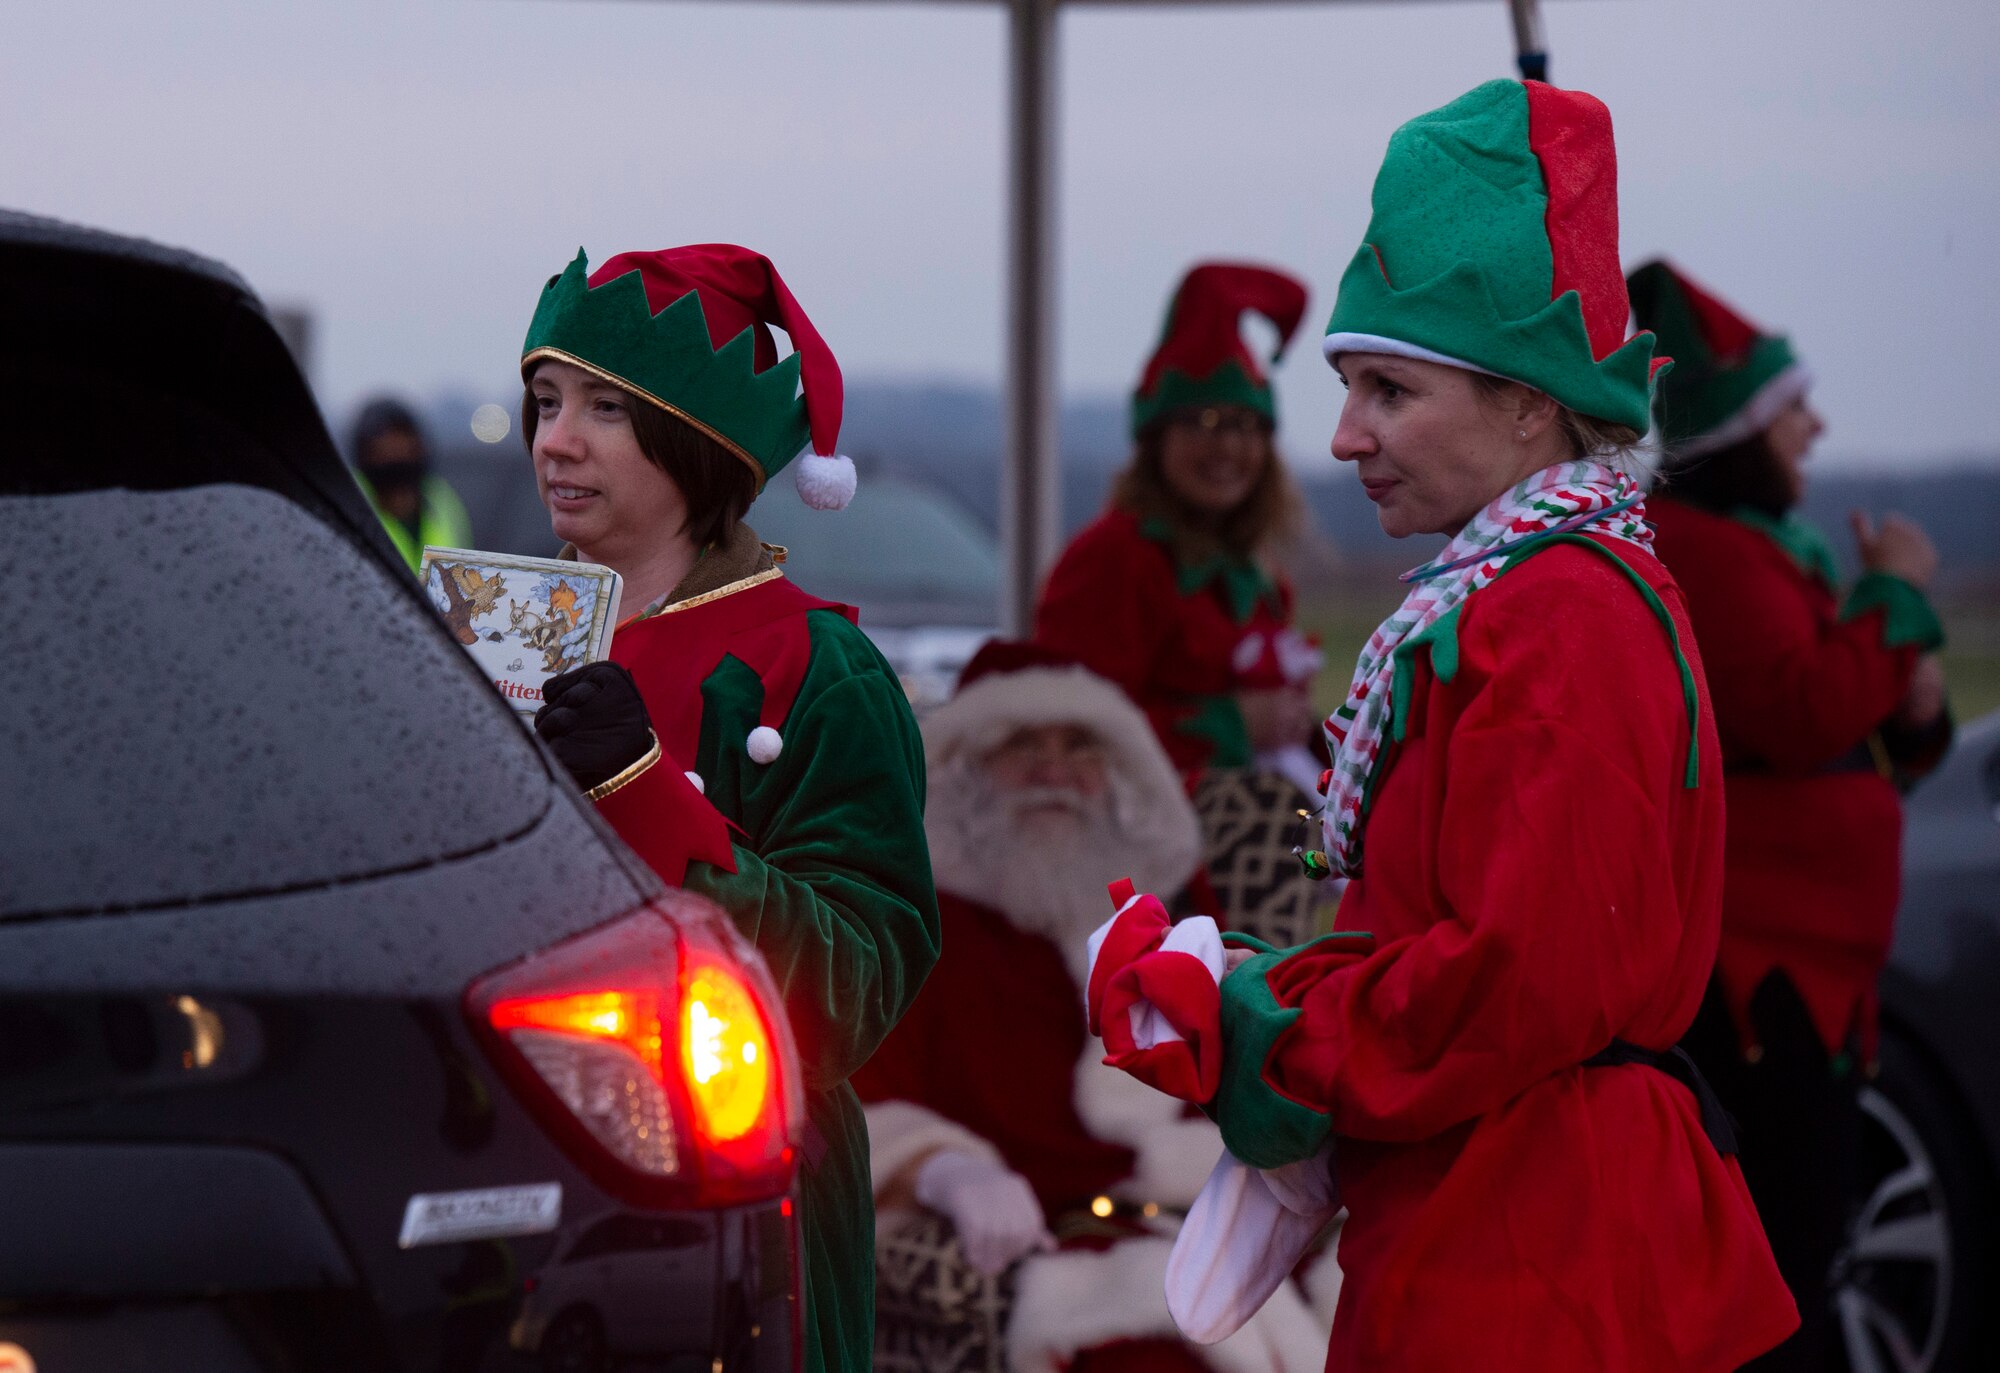 Some of Santa’s elves pass out goodie bags during 2021 Tree Lighting drive-thru event hosted by the 88th Force Support Squadron at Wright-Patterson Air Force Base, Ohio, Dec. 1, 2021. Families were able to go through the drive-thru, get goody bags and hot chocolate from Santa’s elves, and then park to watch the lighting of the base’s Christmas tree over Facebook Live. (U.S. Air Force photo by Jaima Fogg)